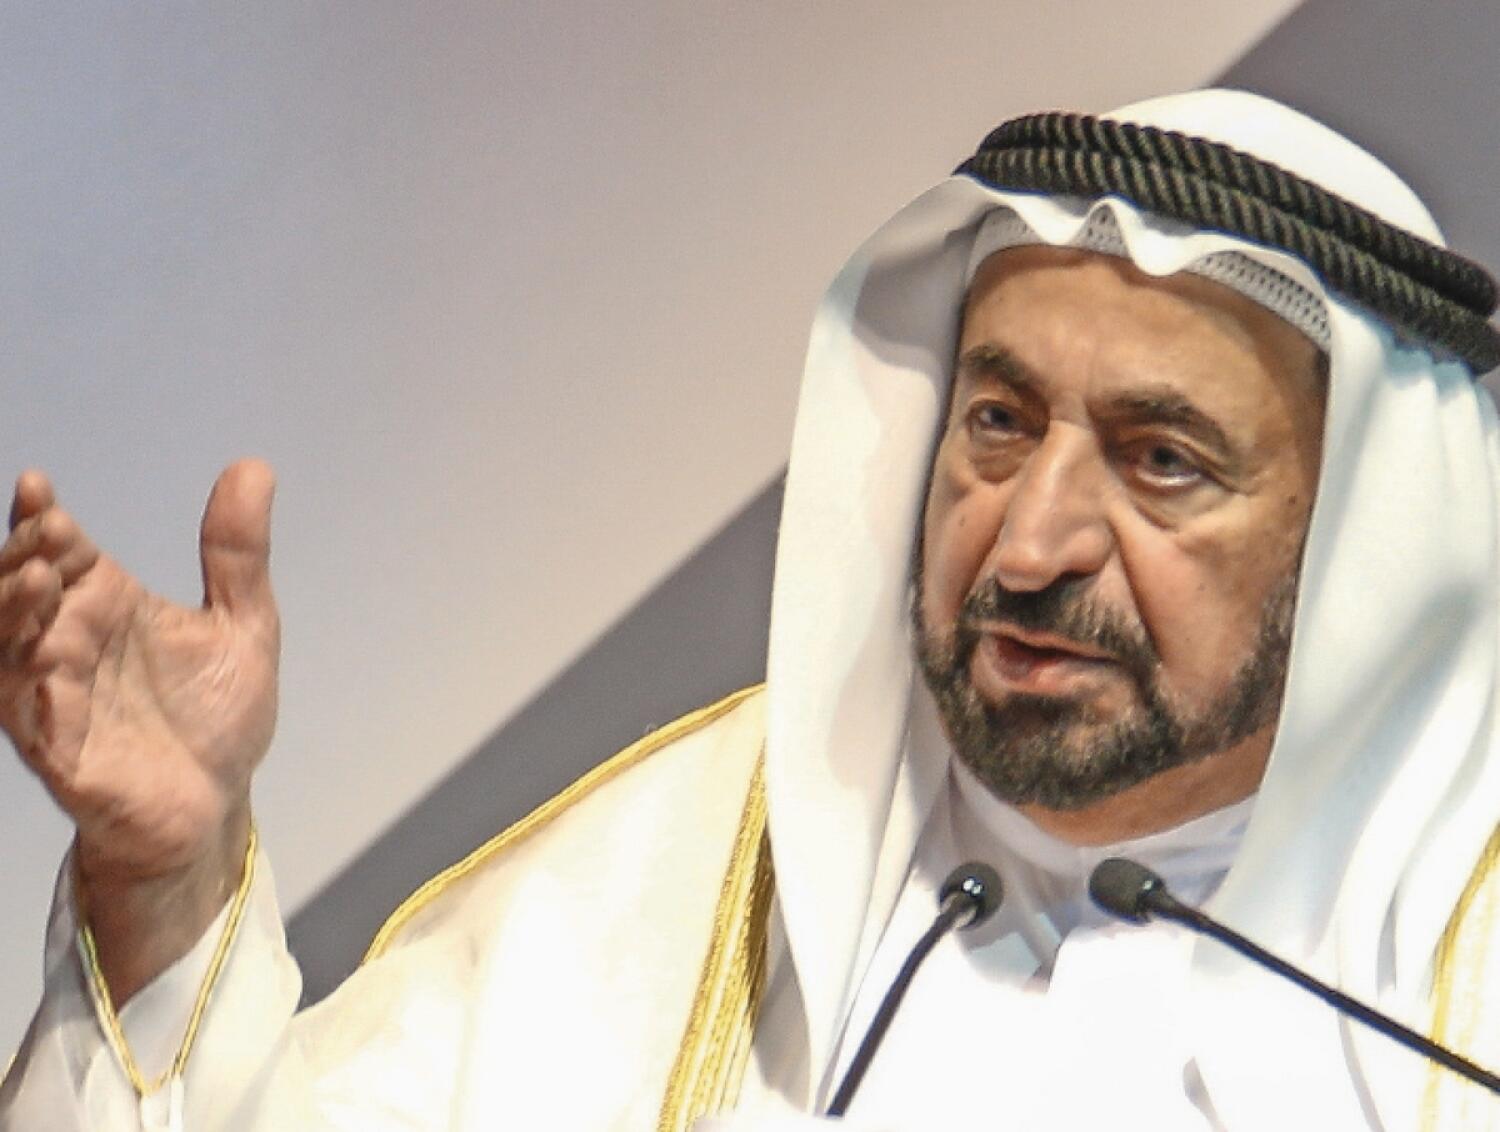 The Sharjah Ruler authorises the construction of a new school, hospital, and shopping mall.